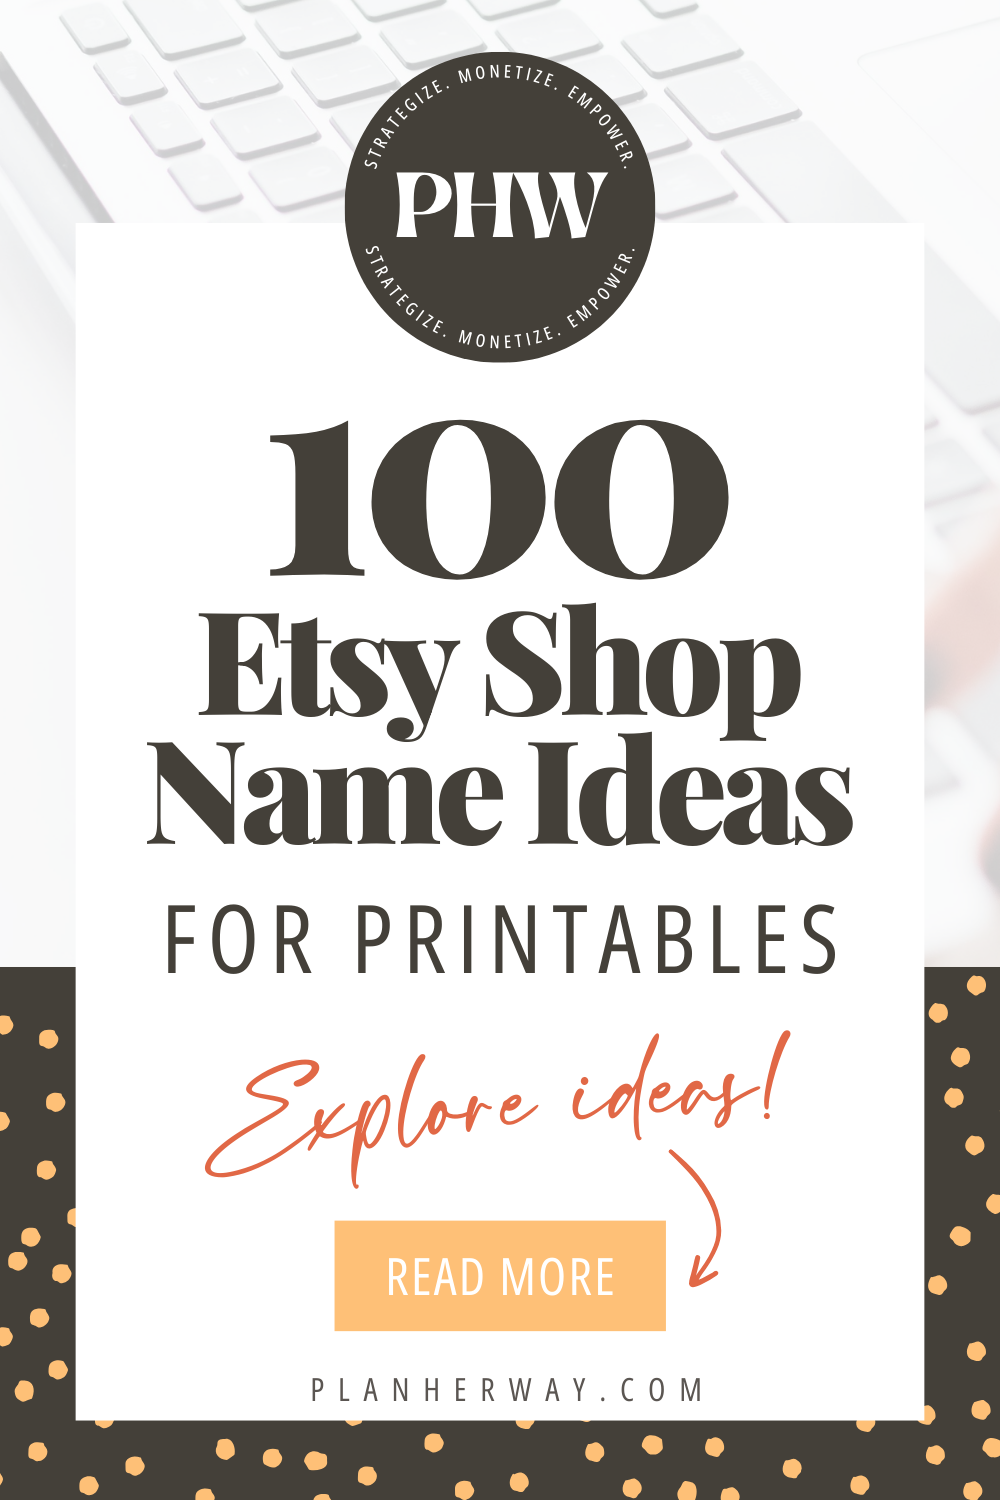 Etsy Shop Name Ideas for Printables